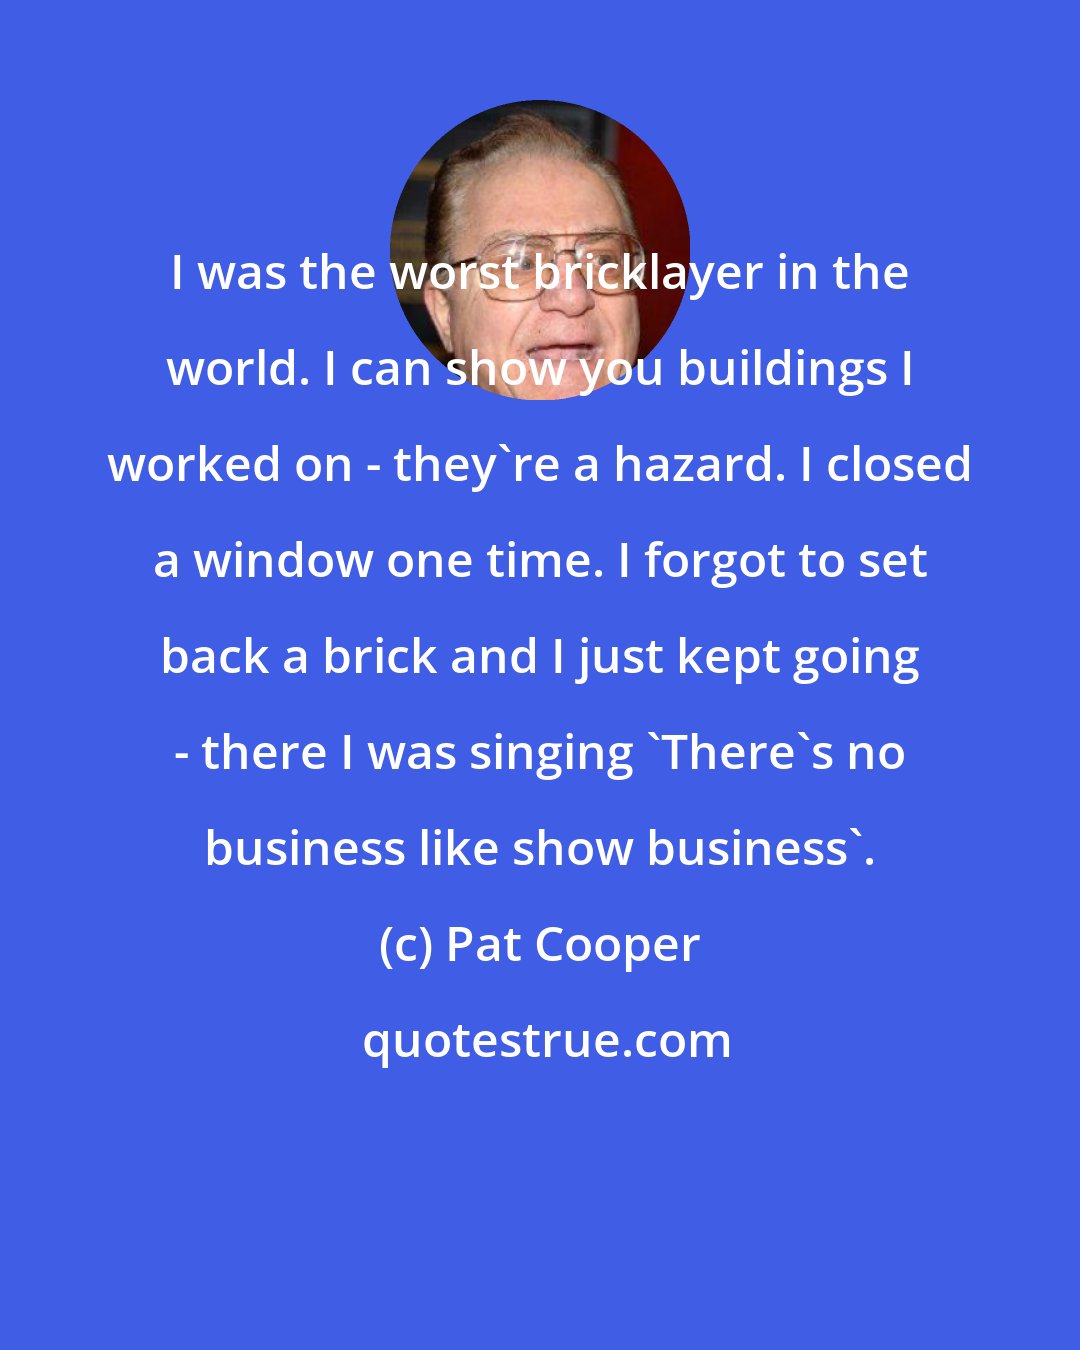 Pat Cooper: I was the worst bricklayer in the world. I can show you buildings I worked on - they're a hazard. I closed a window one time. I forgot to set back a brick and I just kept going - there I was singing 'There's no business like show business'.